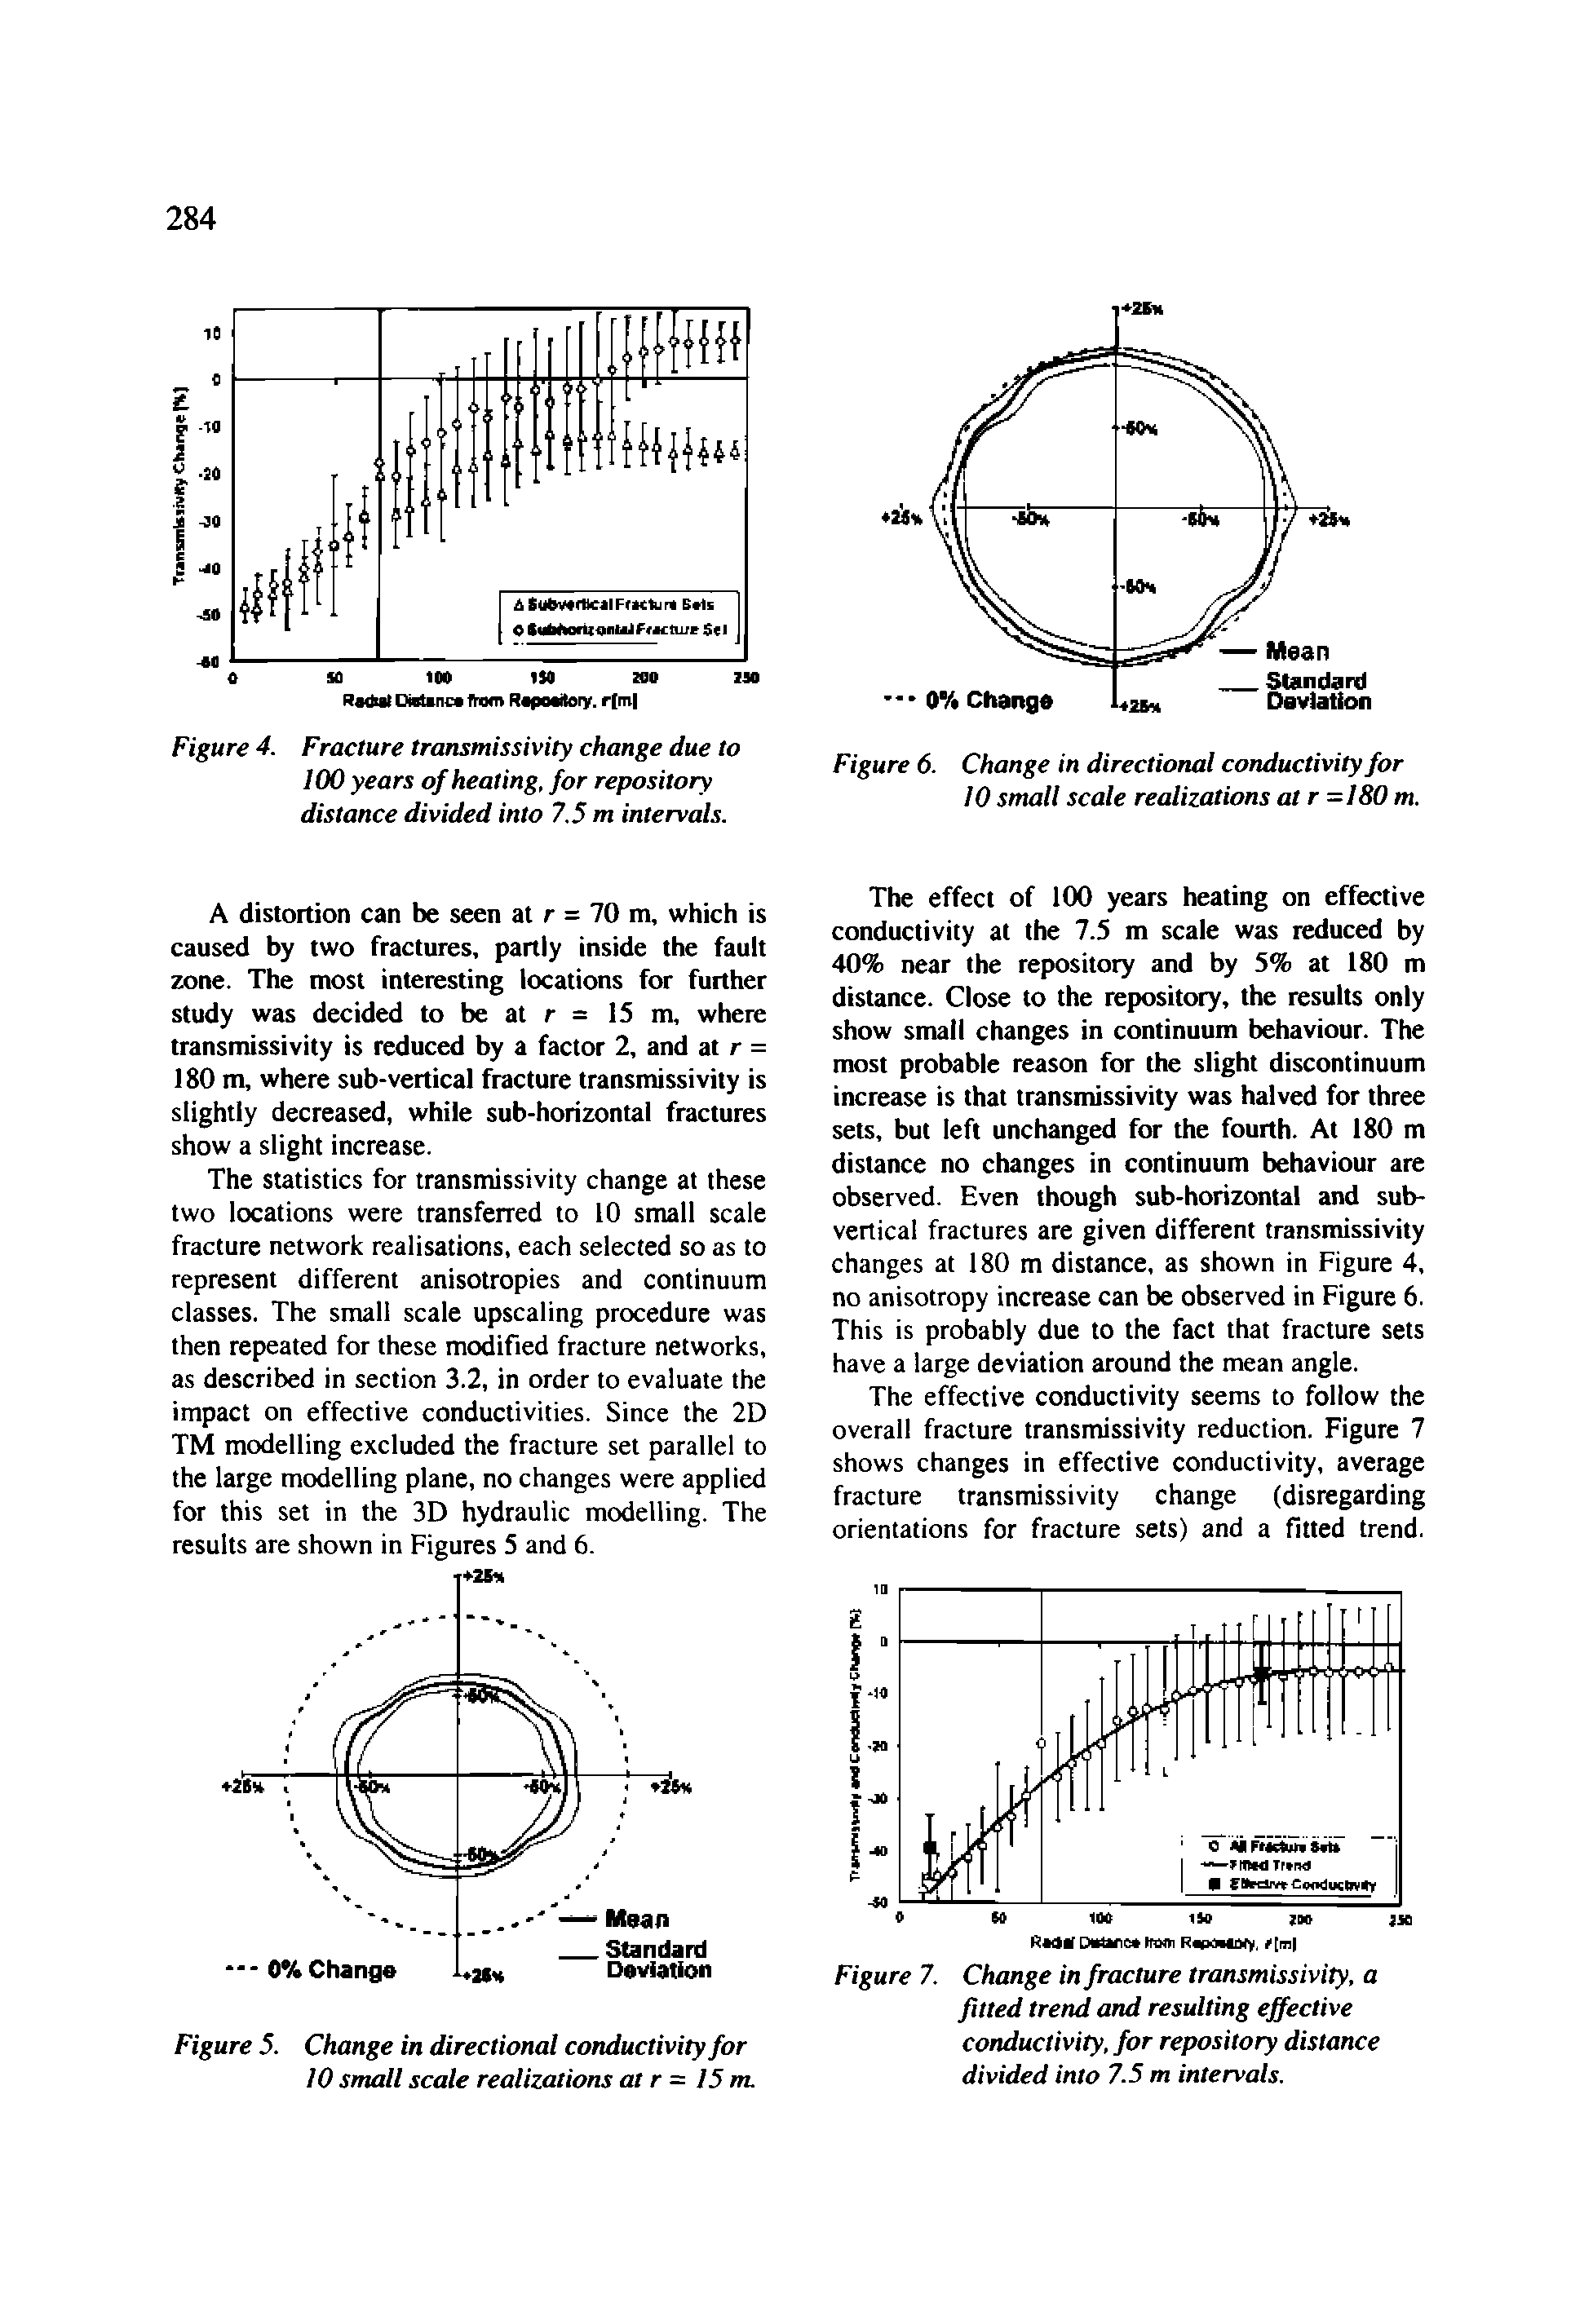 Figure 4. Fracture transmissivity change due to 100 years of healing, for repository distance divided into 7.5 m intervals.